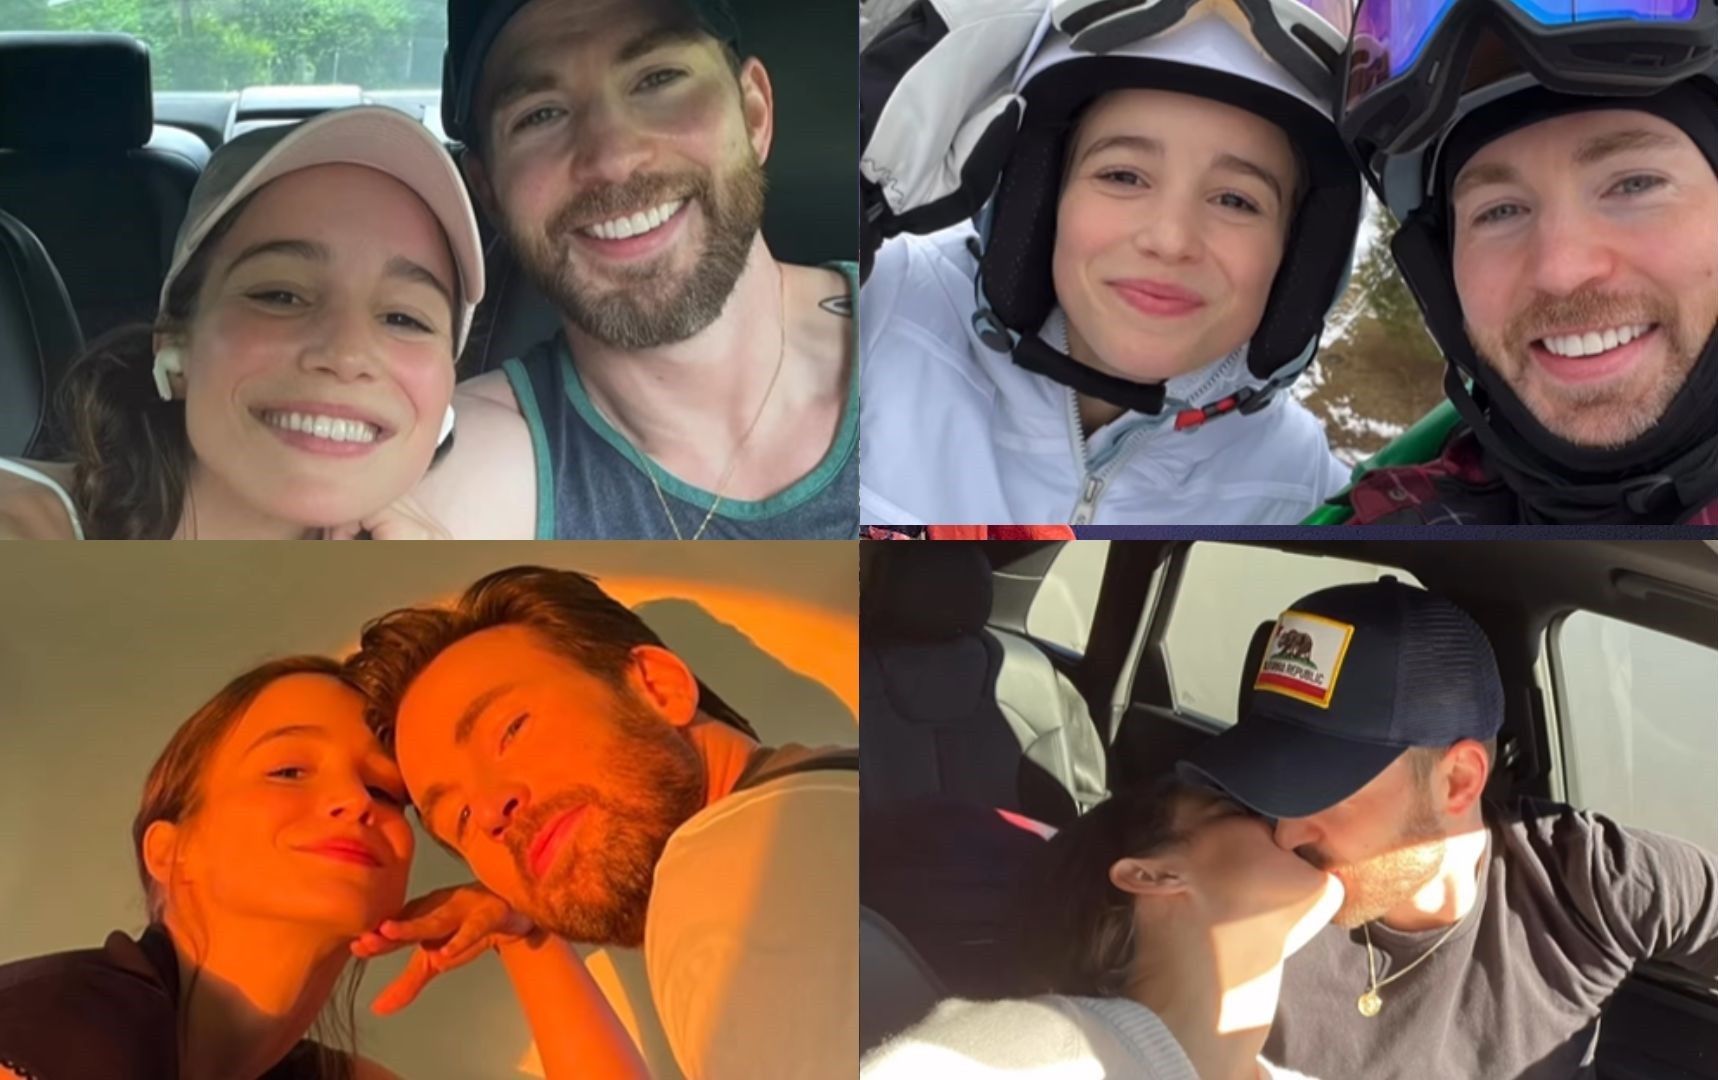 Chris Evans shared video montage of him with his girlfriend Alba Baptista on Valentine's Day on Instagram